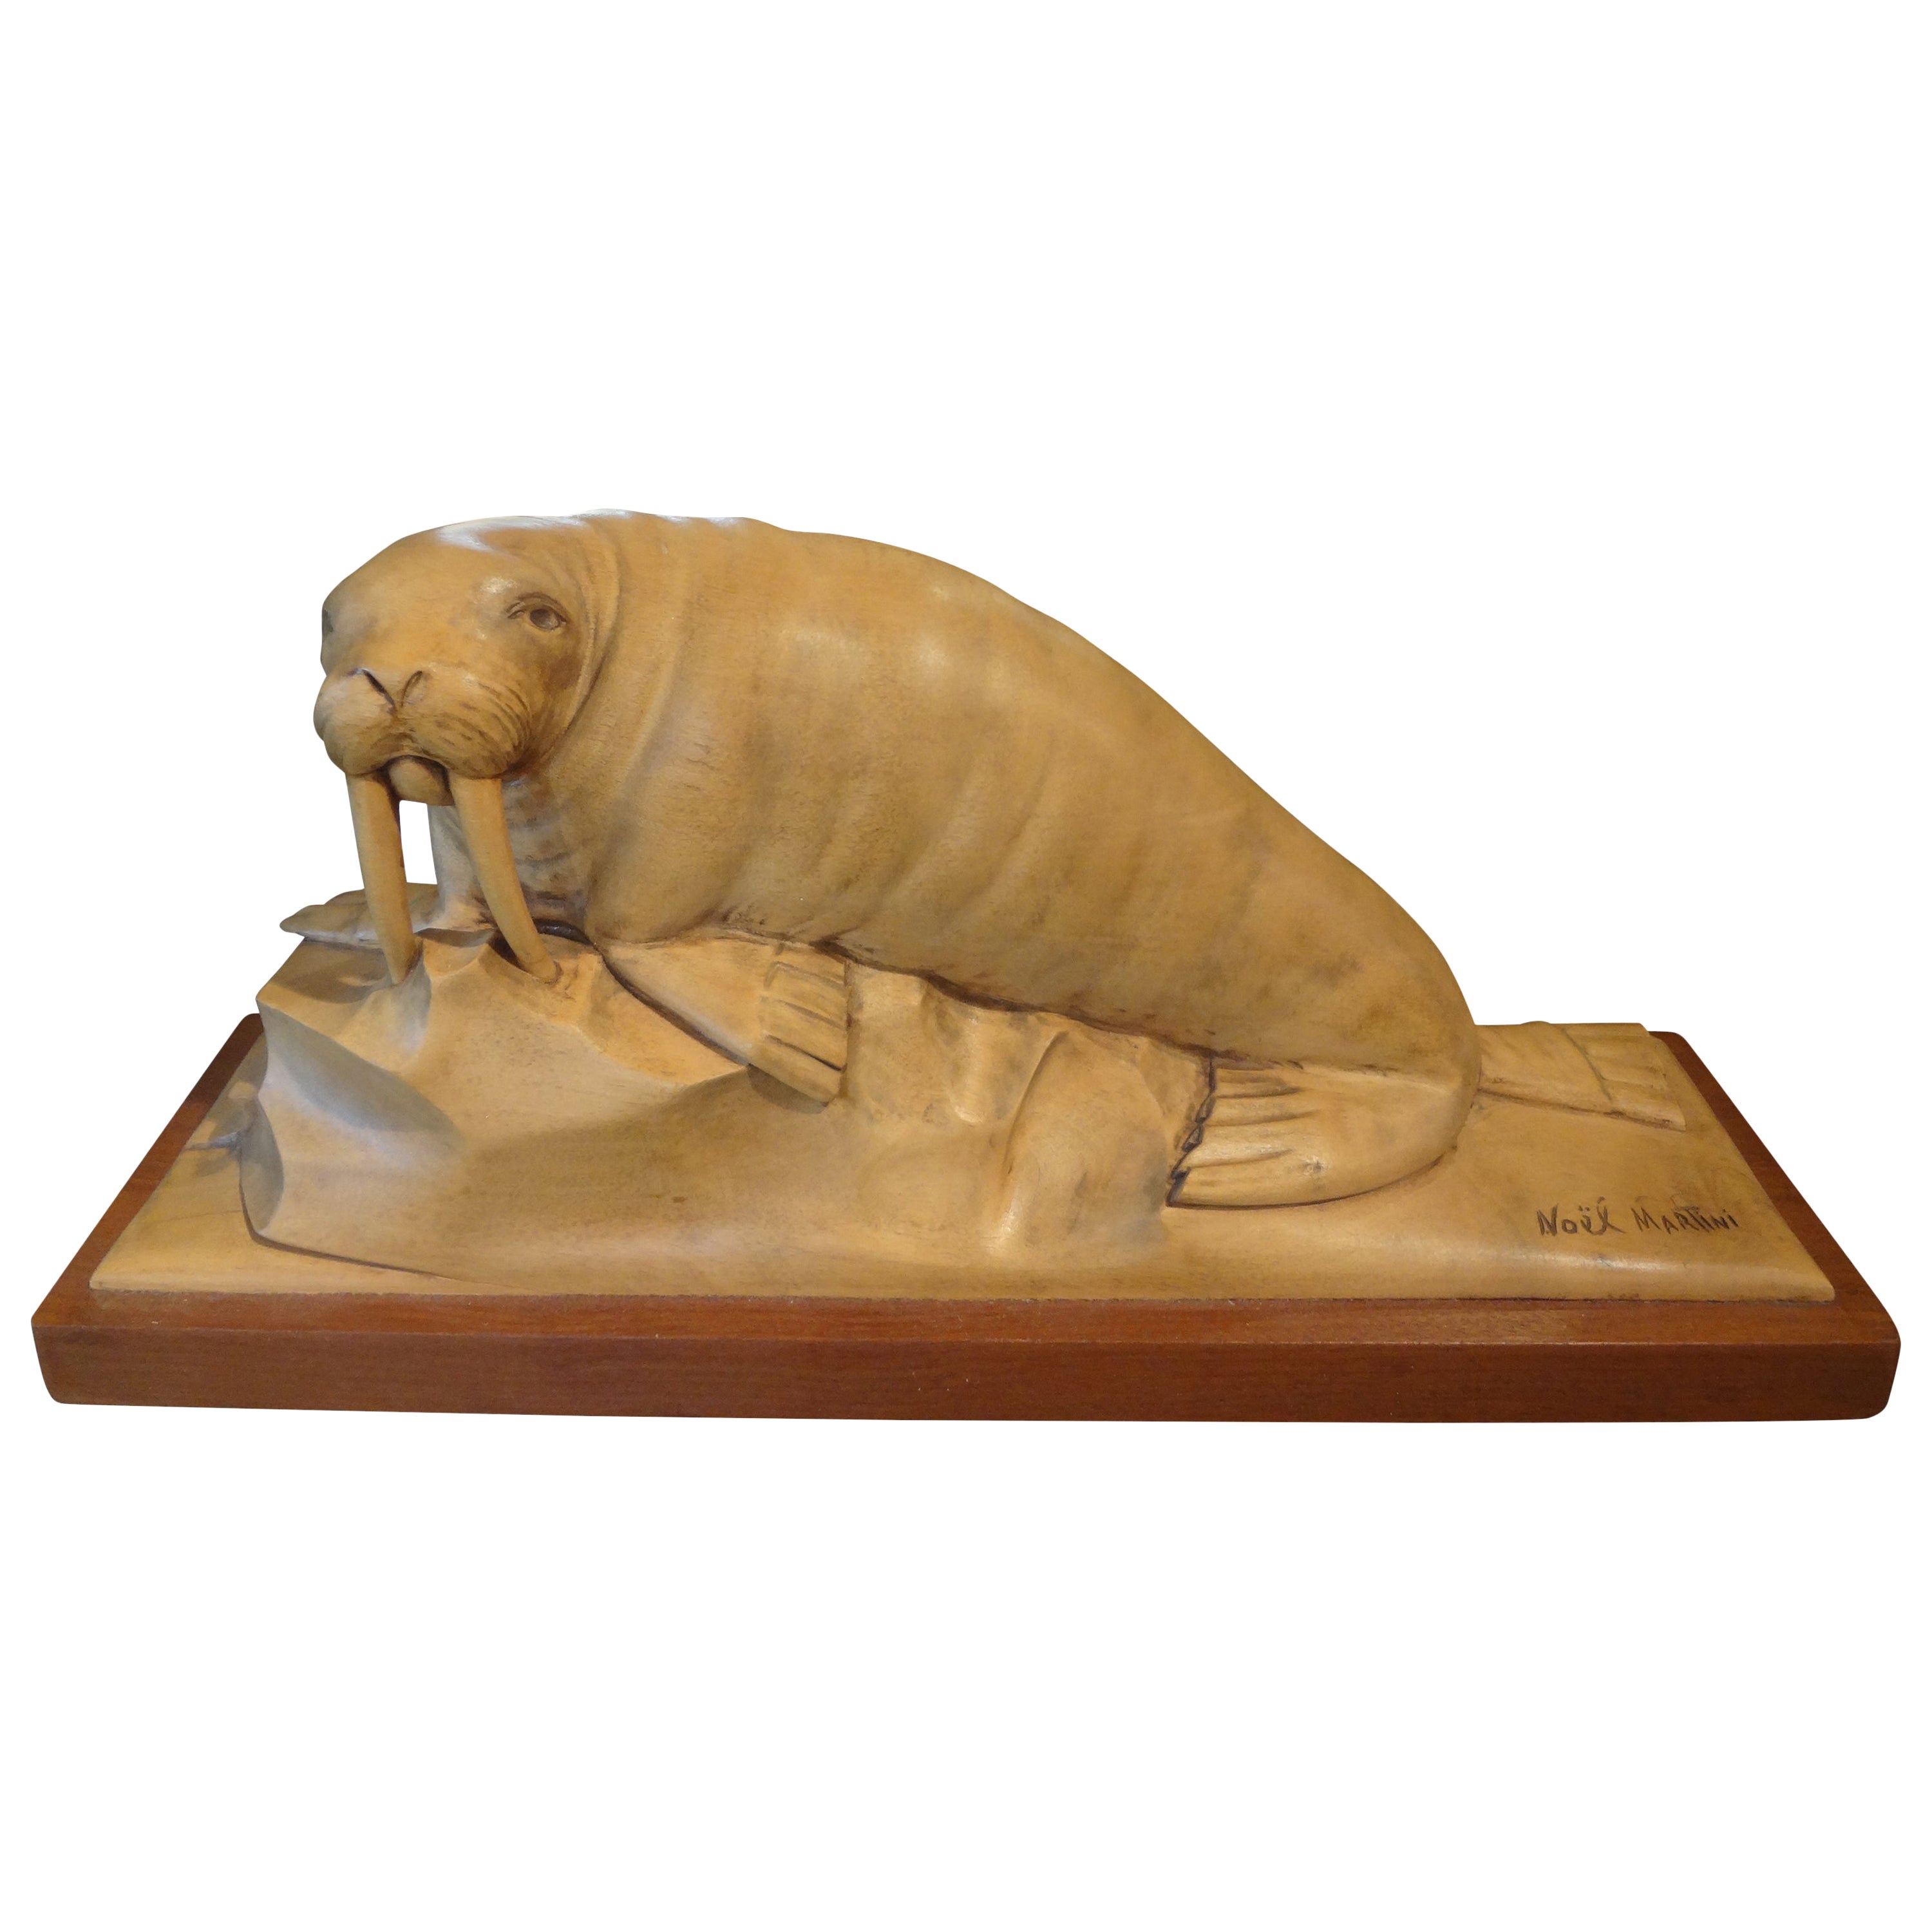 French Art Deco Carved Wood Walrus Sculpture, Signed Martini For Sale